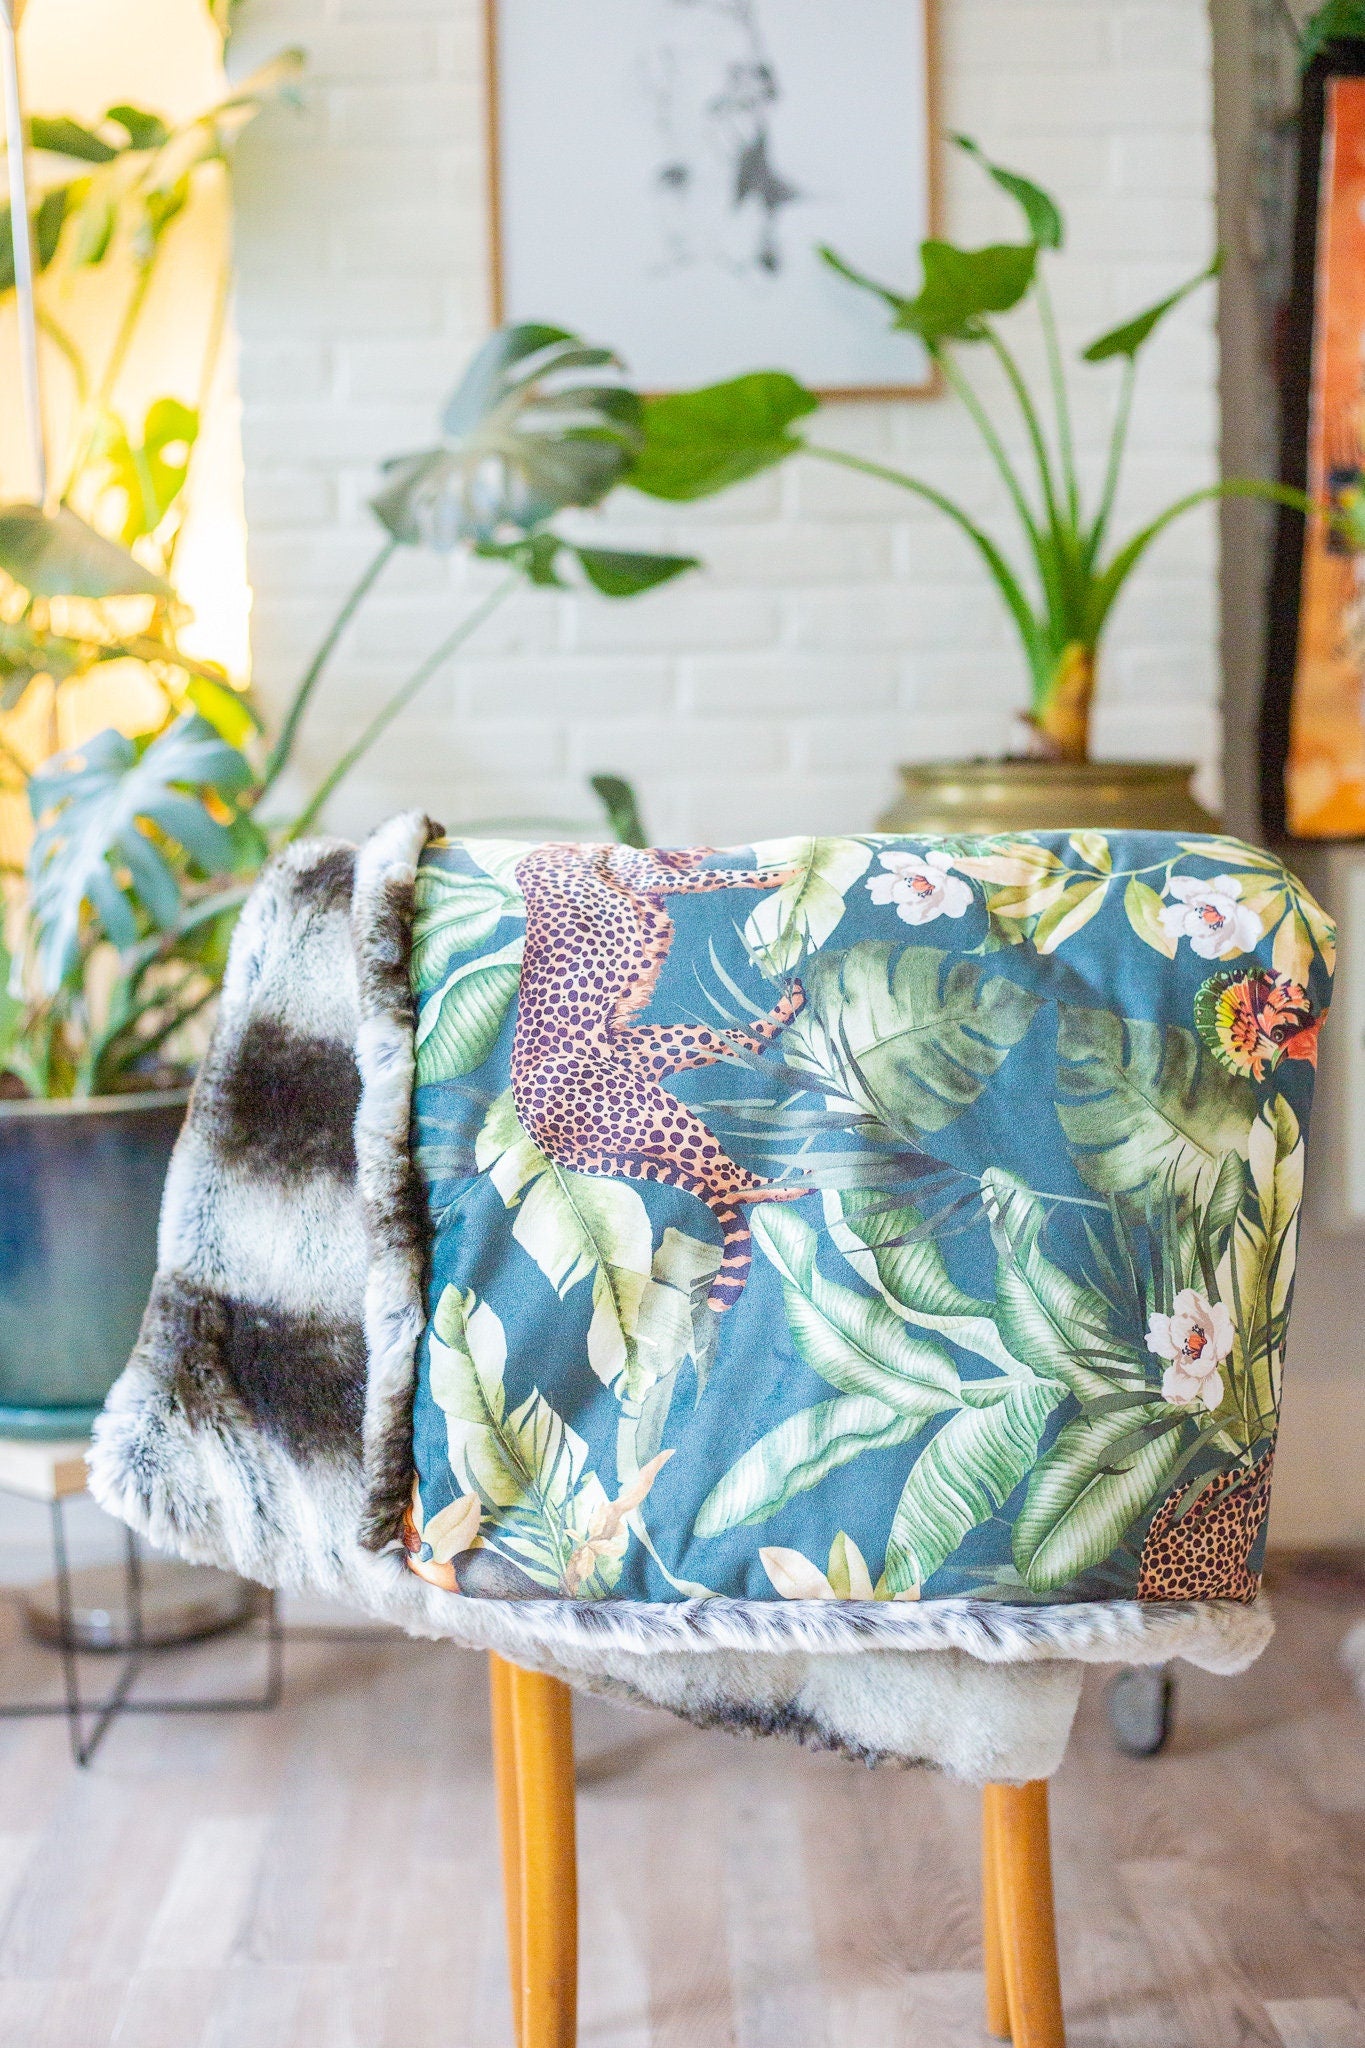 The velvet jungle throw with high-end faux fur